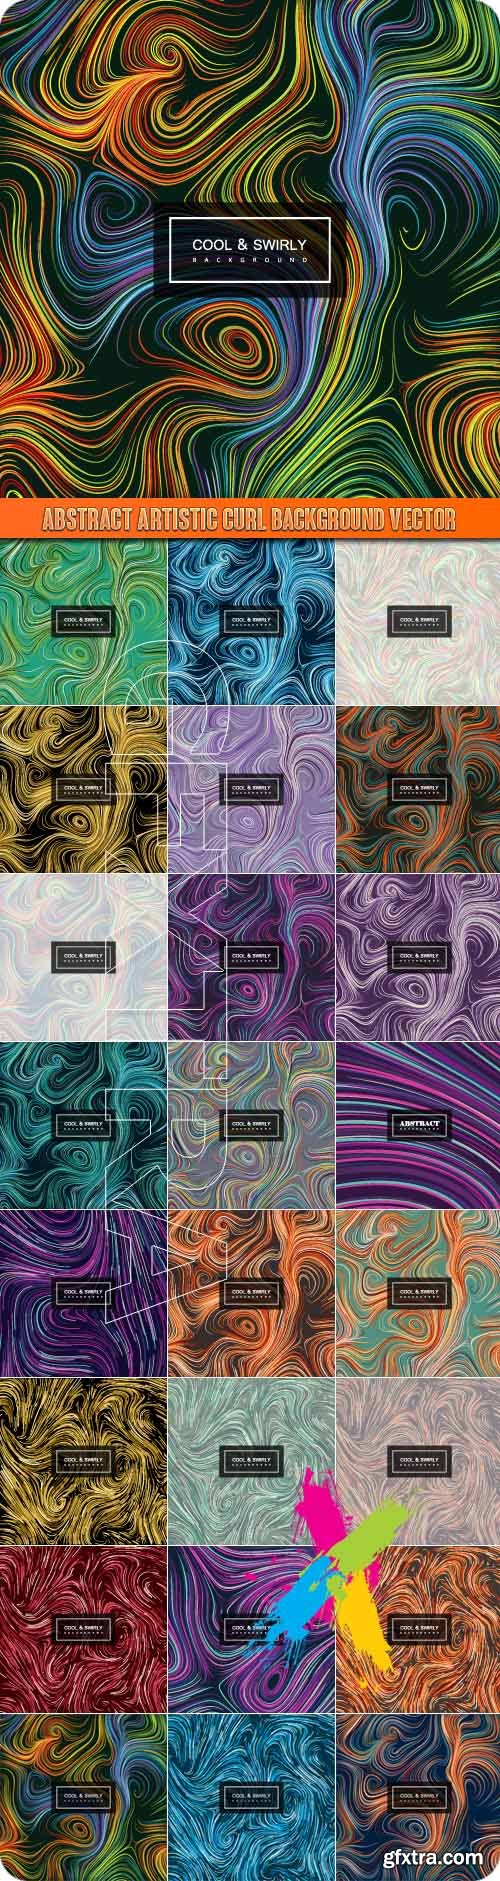 Abstract artistic curl background vector